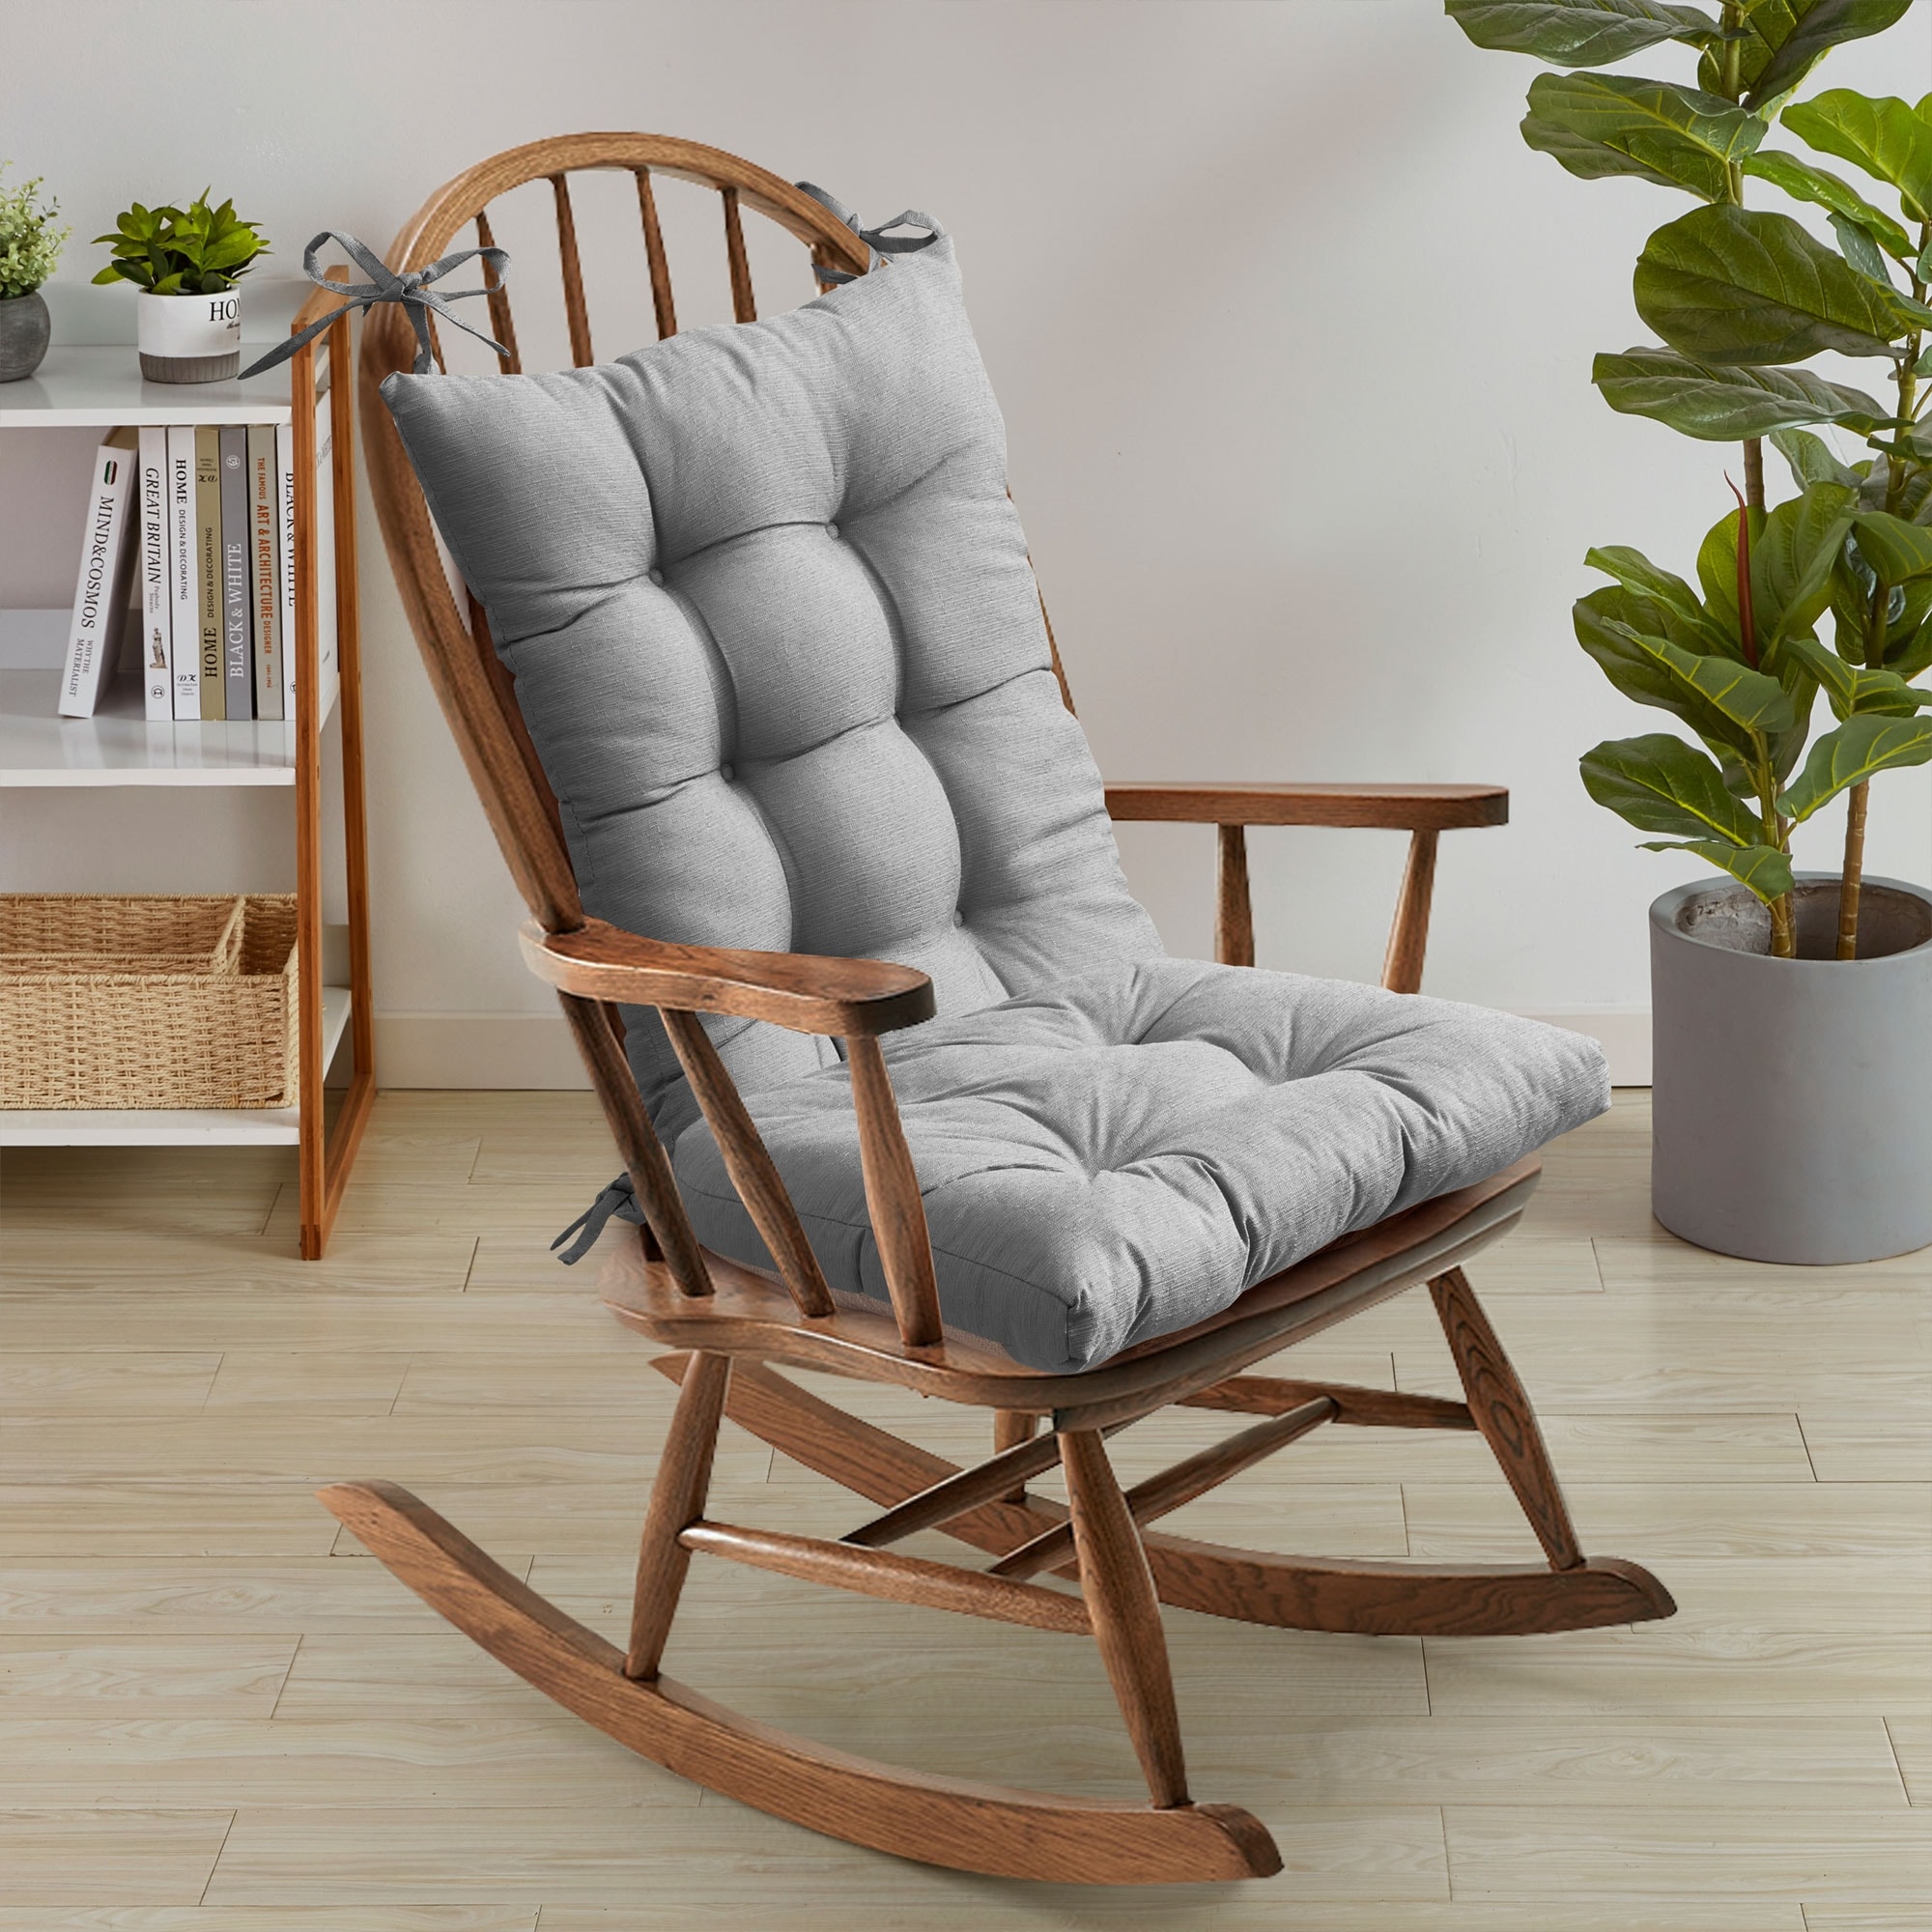 https://ak1.ostkcdn.com/images/products/is/images/direct/4804af230bef7858f125f02598c03c8793c7f86b/Sweet-Home-Collection-Rocking-Chair-Cushion-Set.jpg